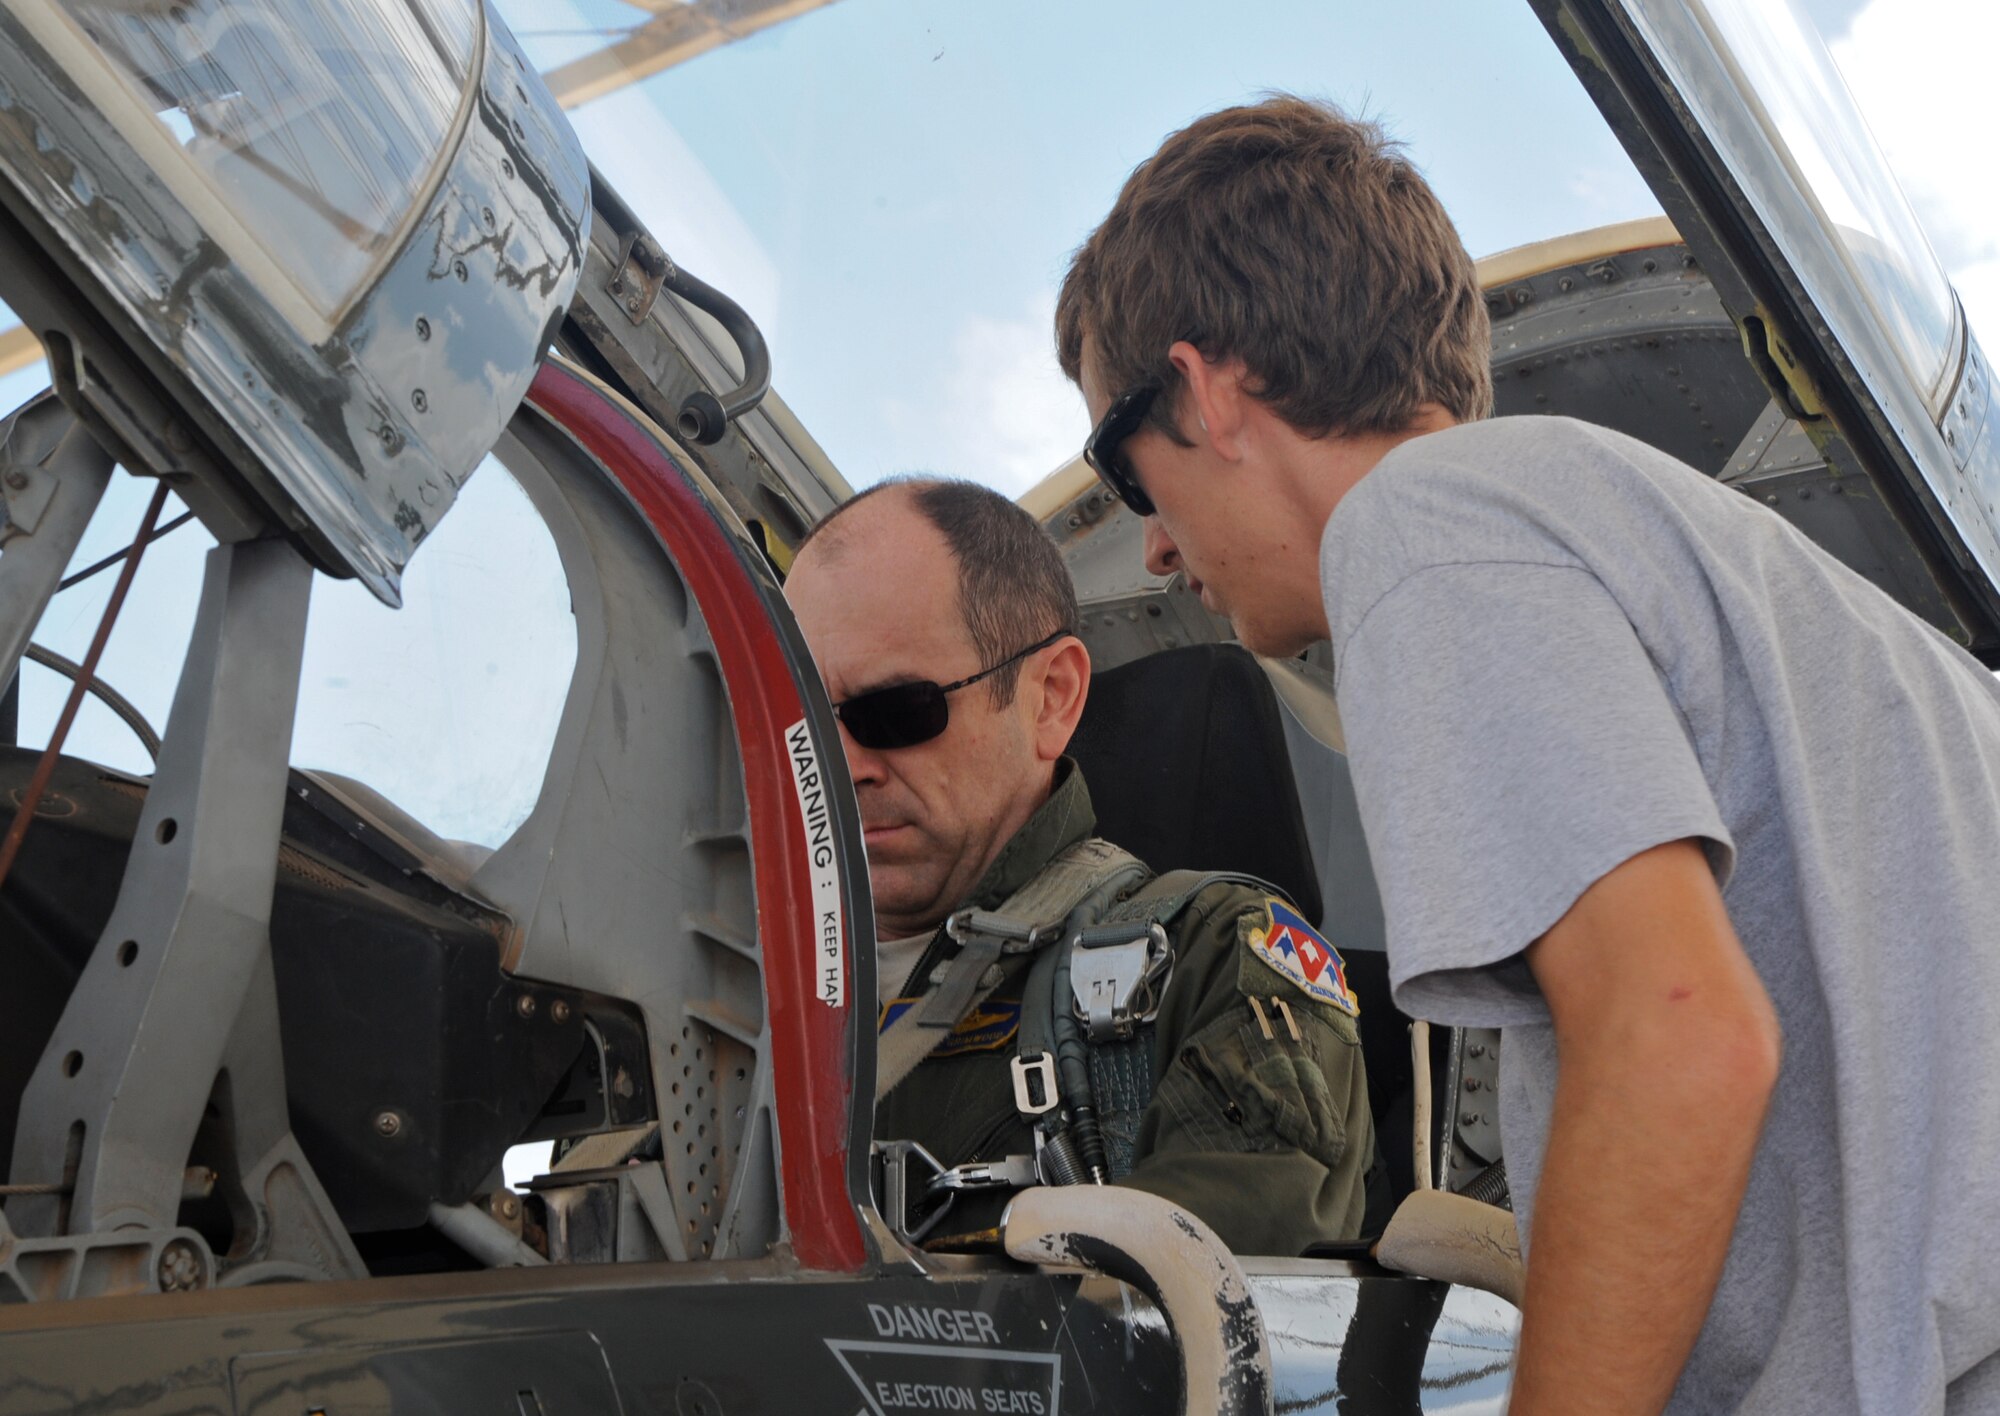 Blake Grimwood, right, worked on the flightline this summer launching T-38 training aircraft at Vance Air Force Base, Okla. Here, he is helping his father, Maj. Dave Grimwood, an instructor pilot with the 25th Flying Training Squadron, prepare for a flight. (U.S. Air Force photo/ Senior Airman Frank Casciotta)